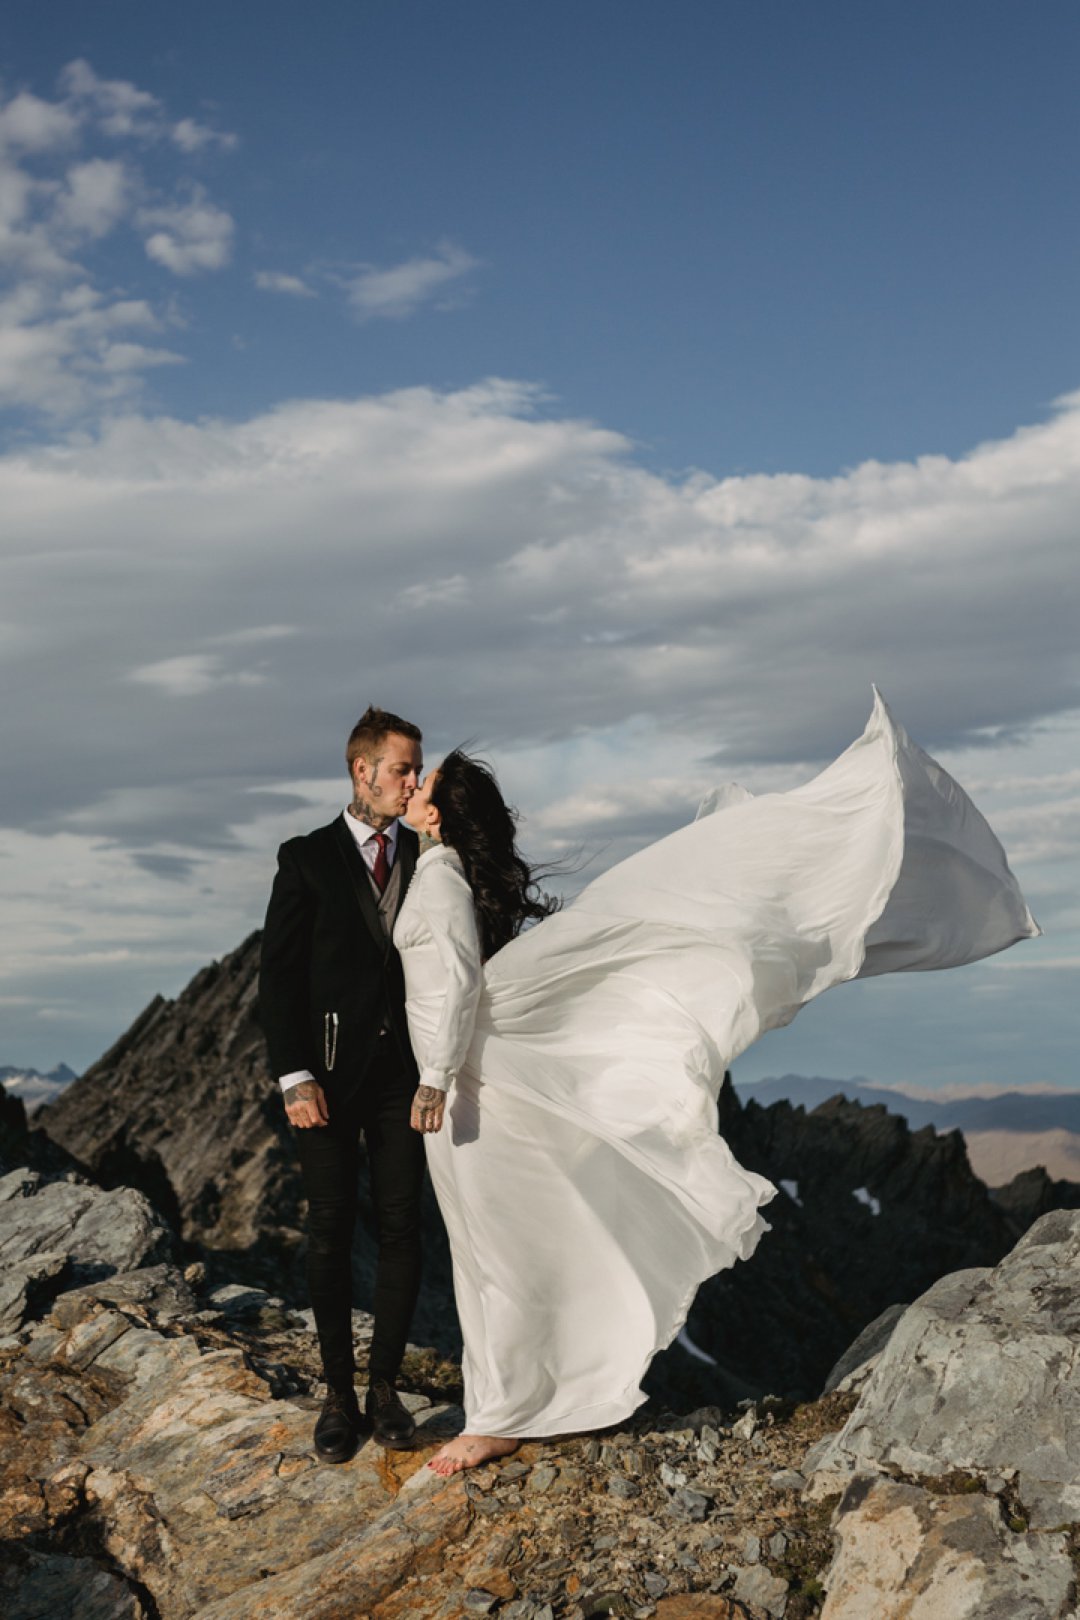 New Zealand bride wearing a long white flowing gown on mountain top wedding ceremony in New Zealand by Dawn Thomson Photography